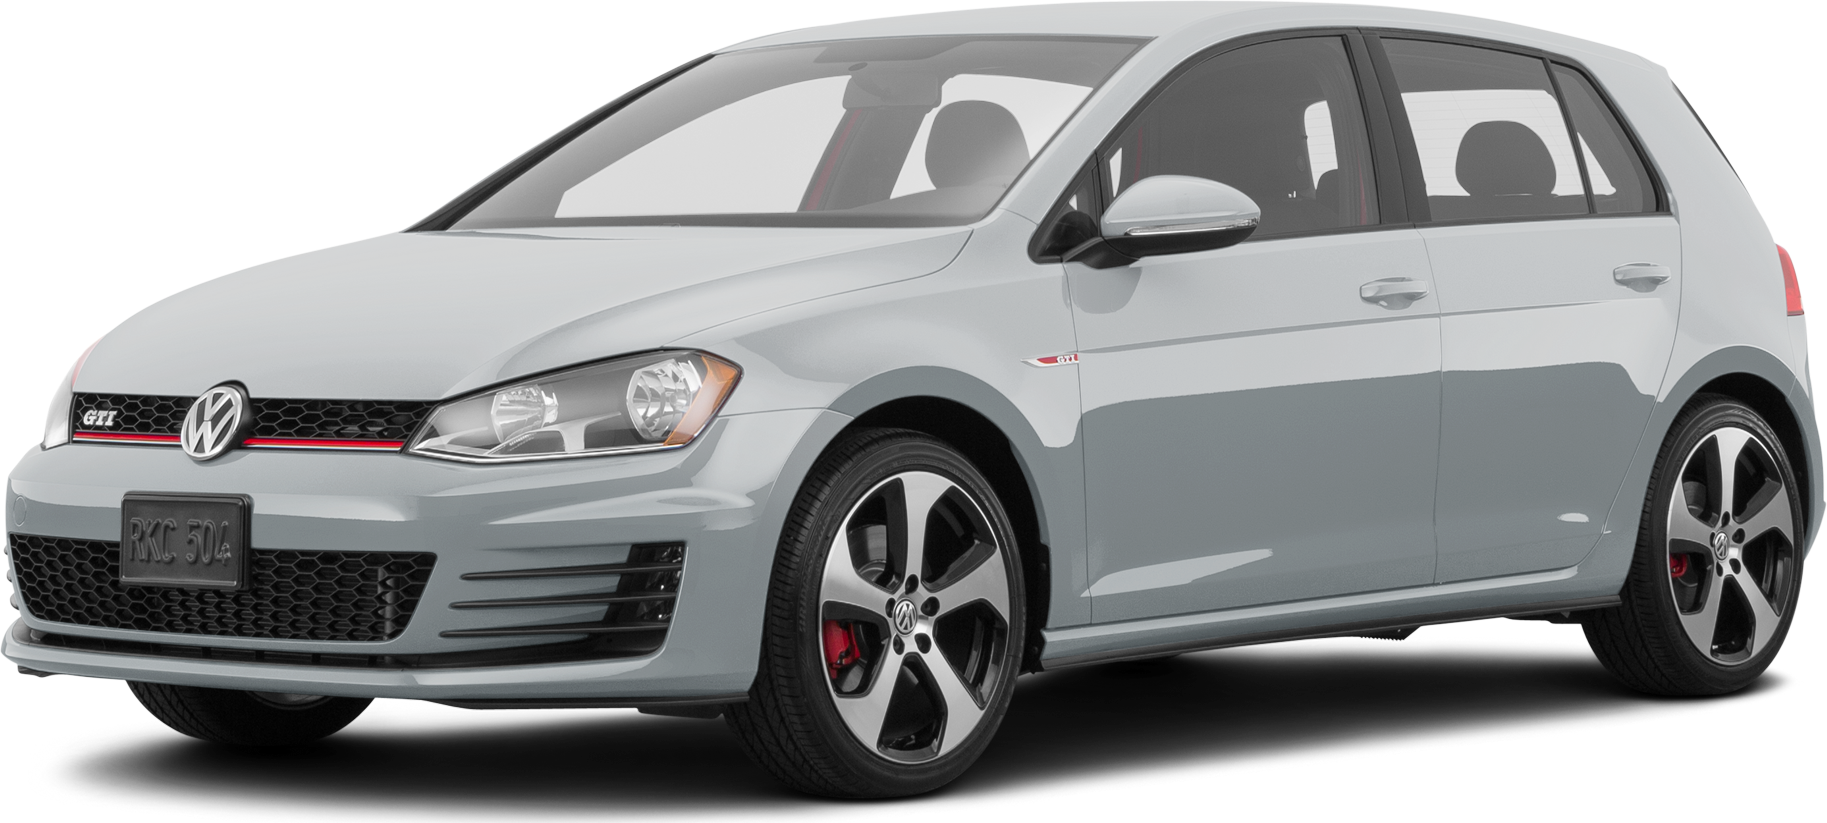 VOLKSWAGEN GOLF golf-7-r-facelift-tuning Used - the parking